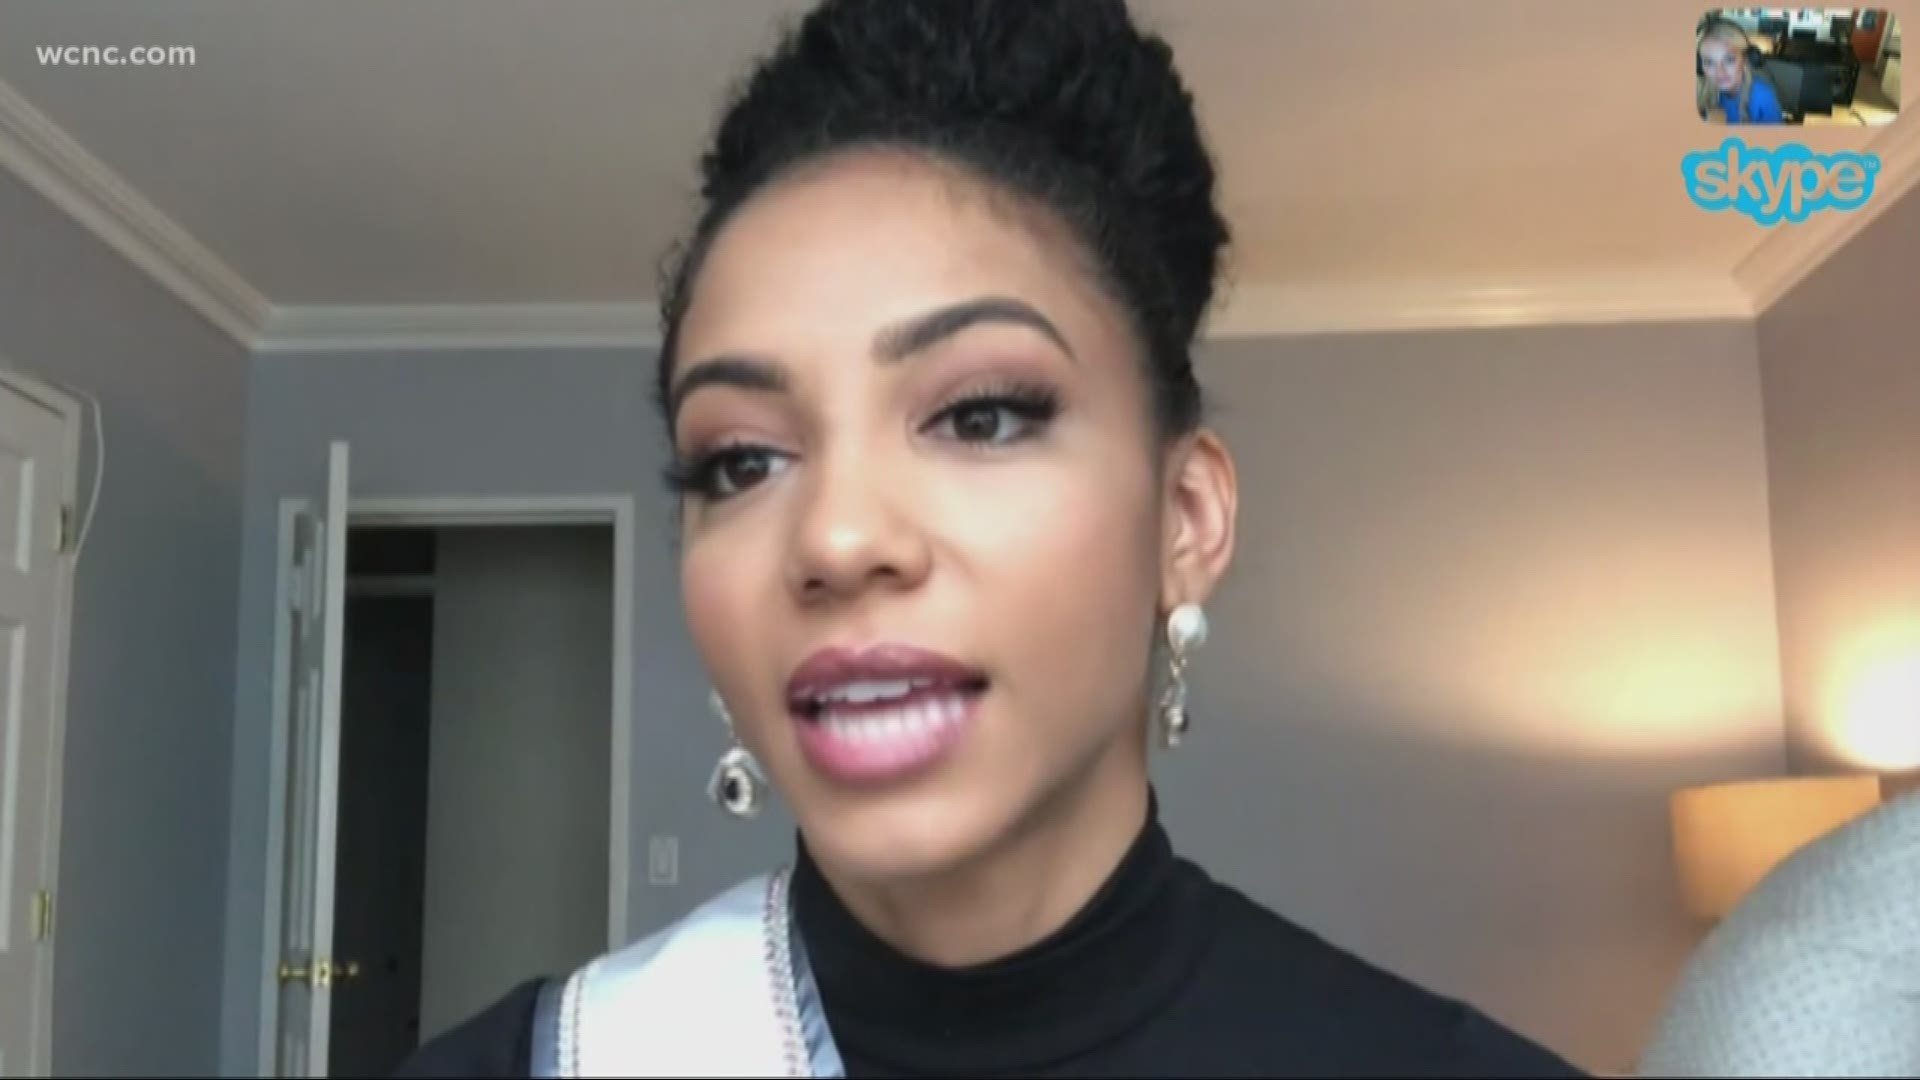 Attorney Cheslie Kryst was crowned Miss North Carolina earlier this month. She wowed the nation with her dedication to her career and community.